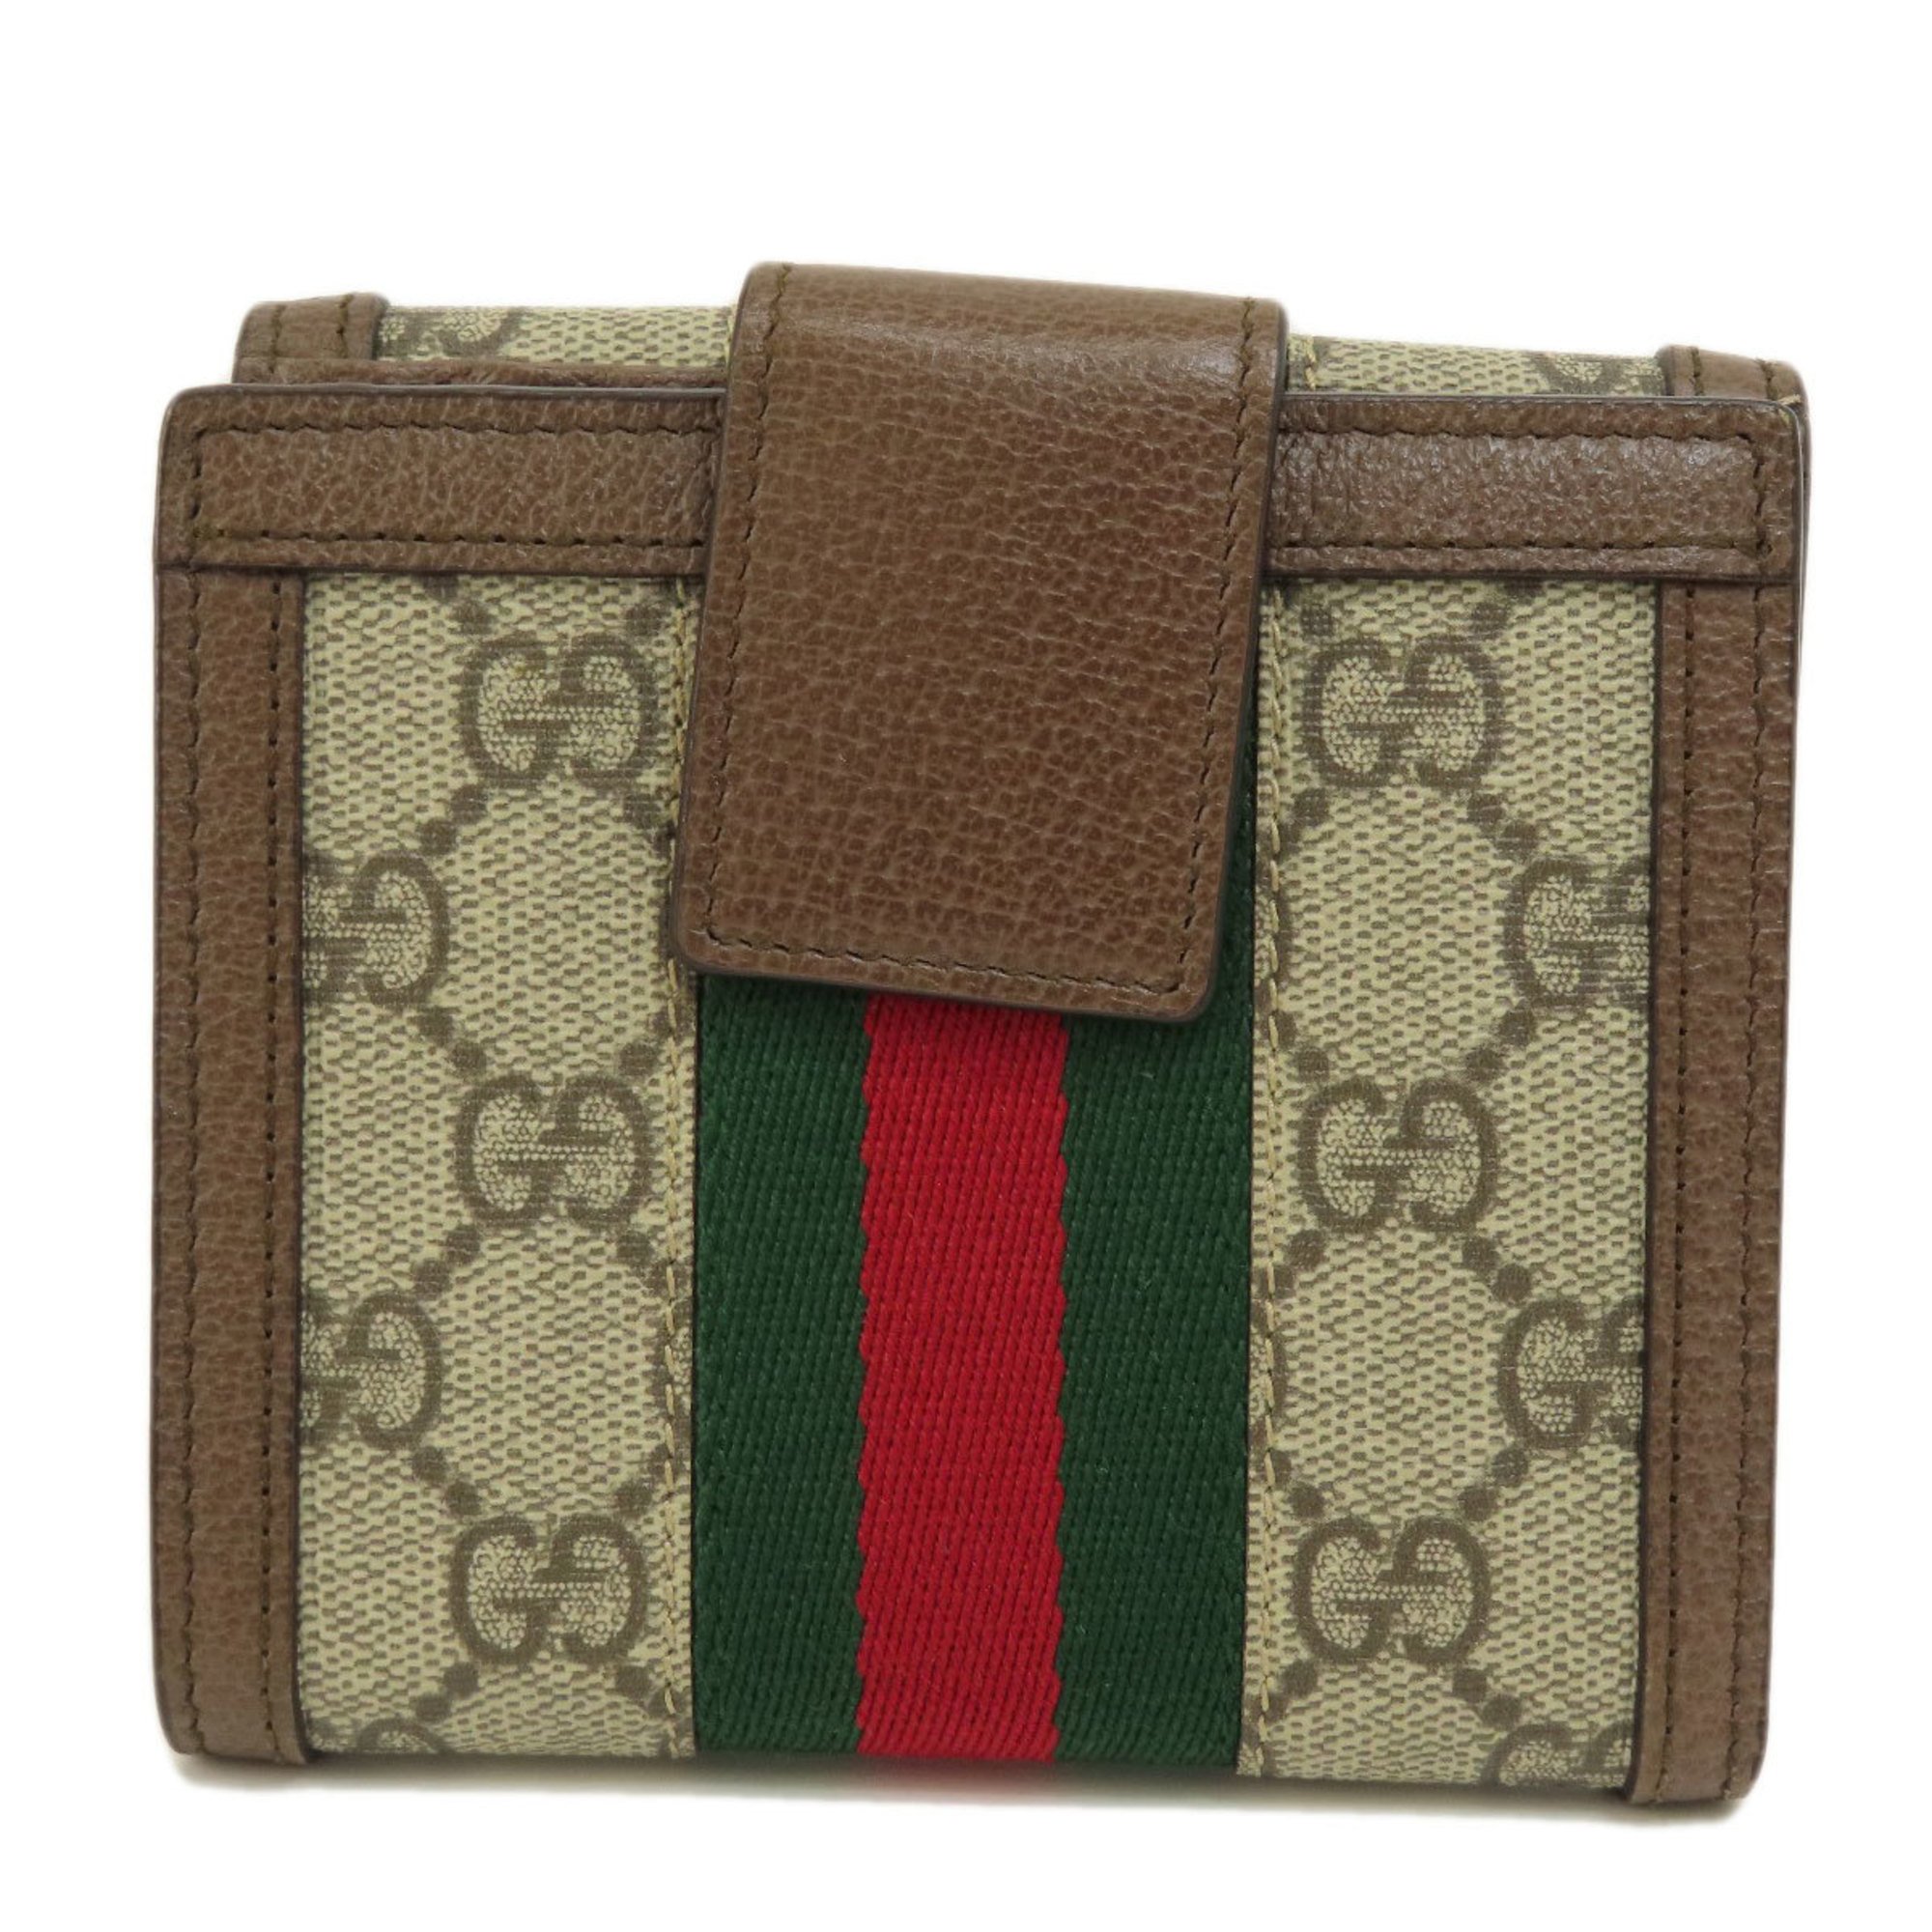 Gucci 523173 Ophidia GG French Flap Wallet Bi-fold Leather Women's